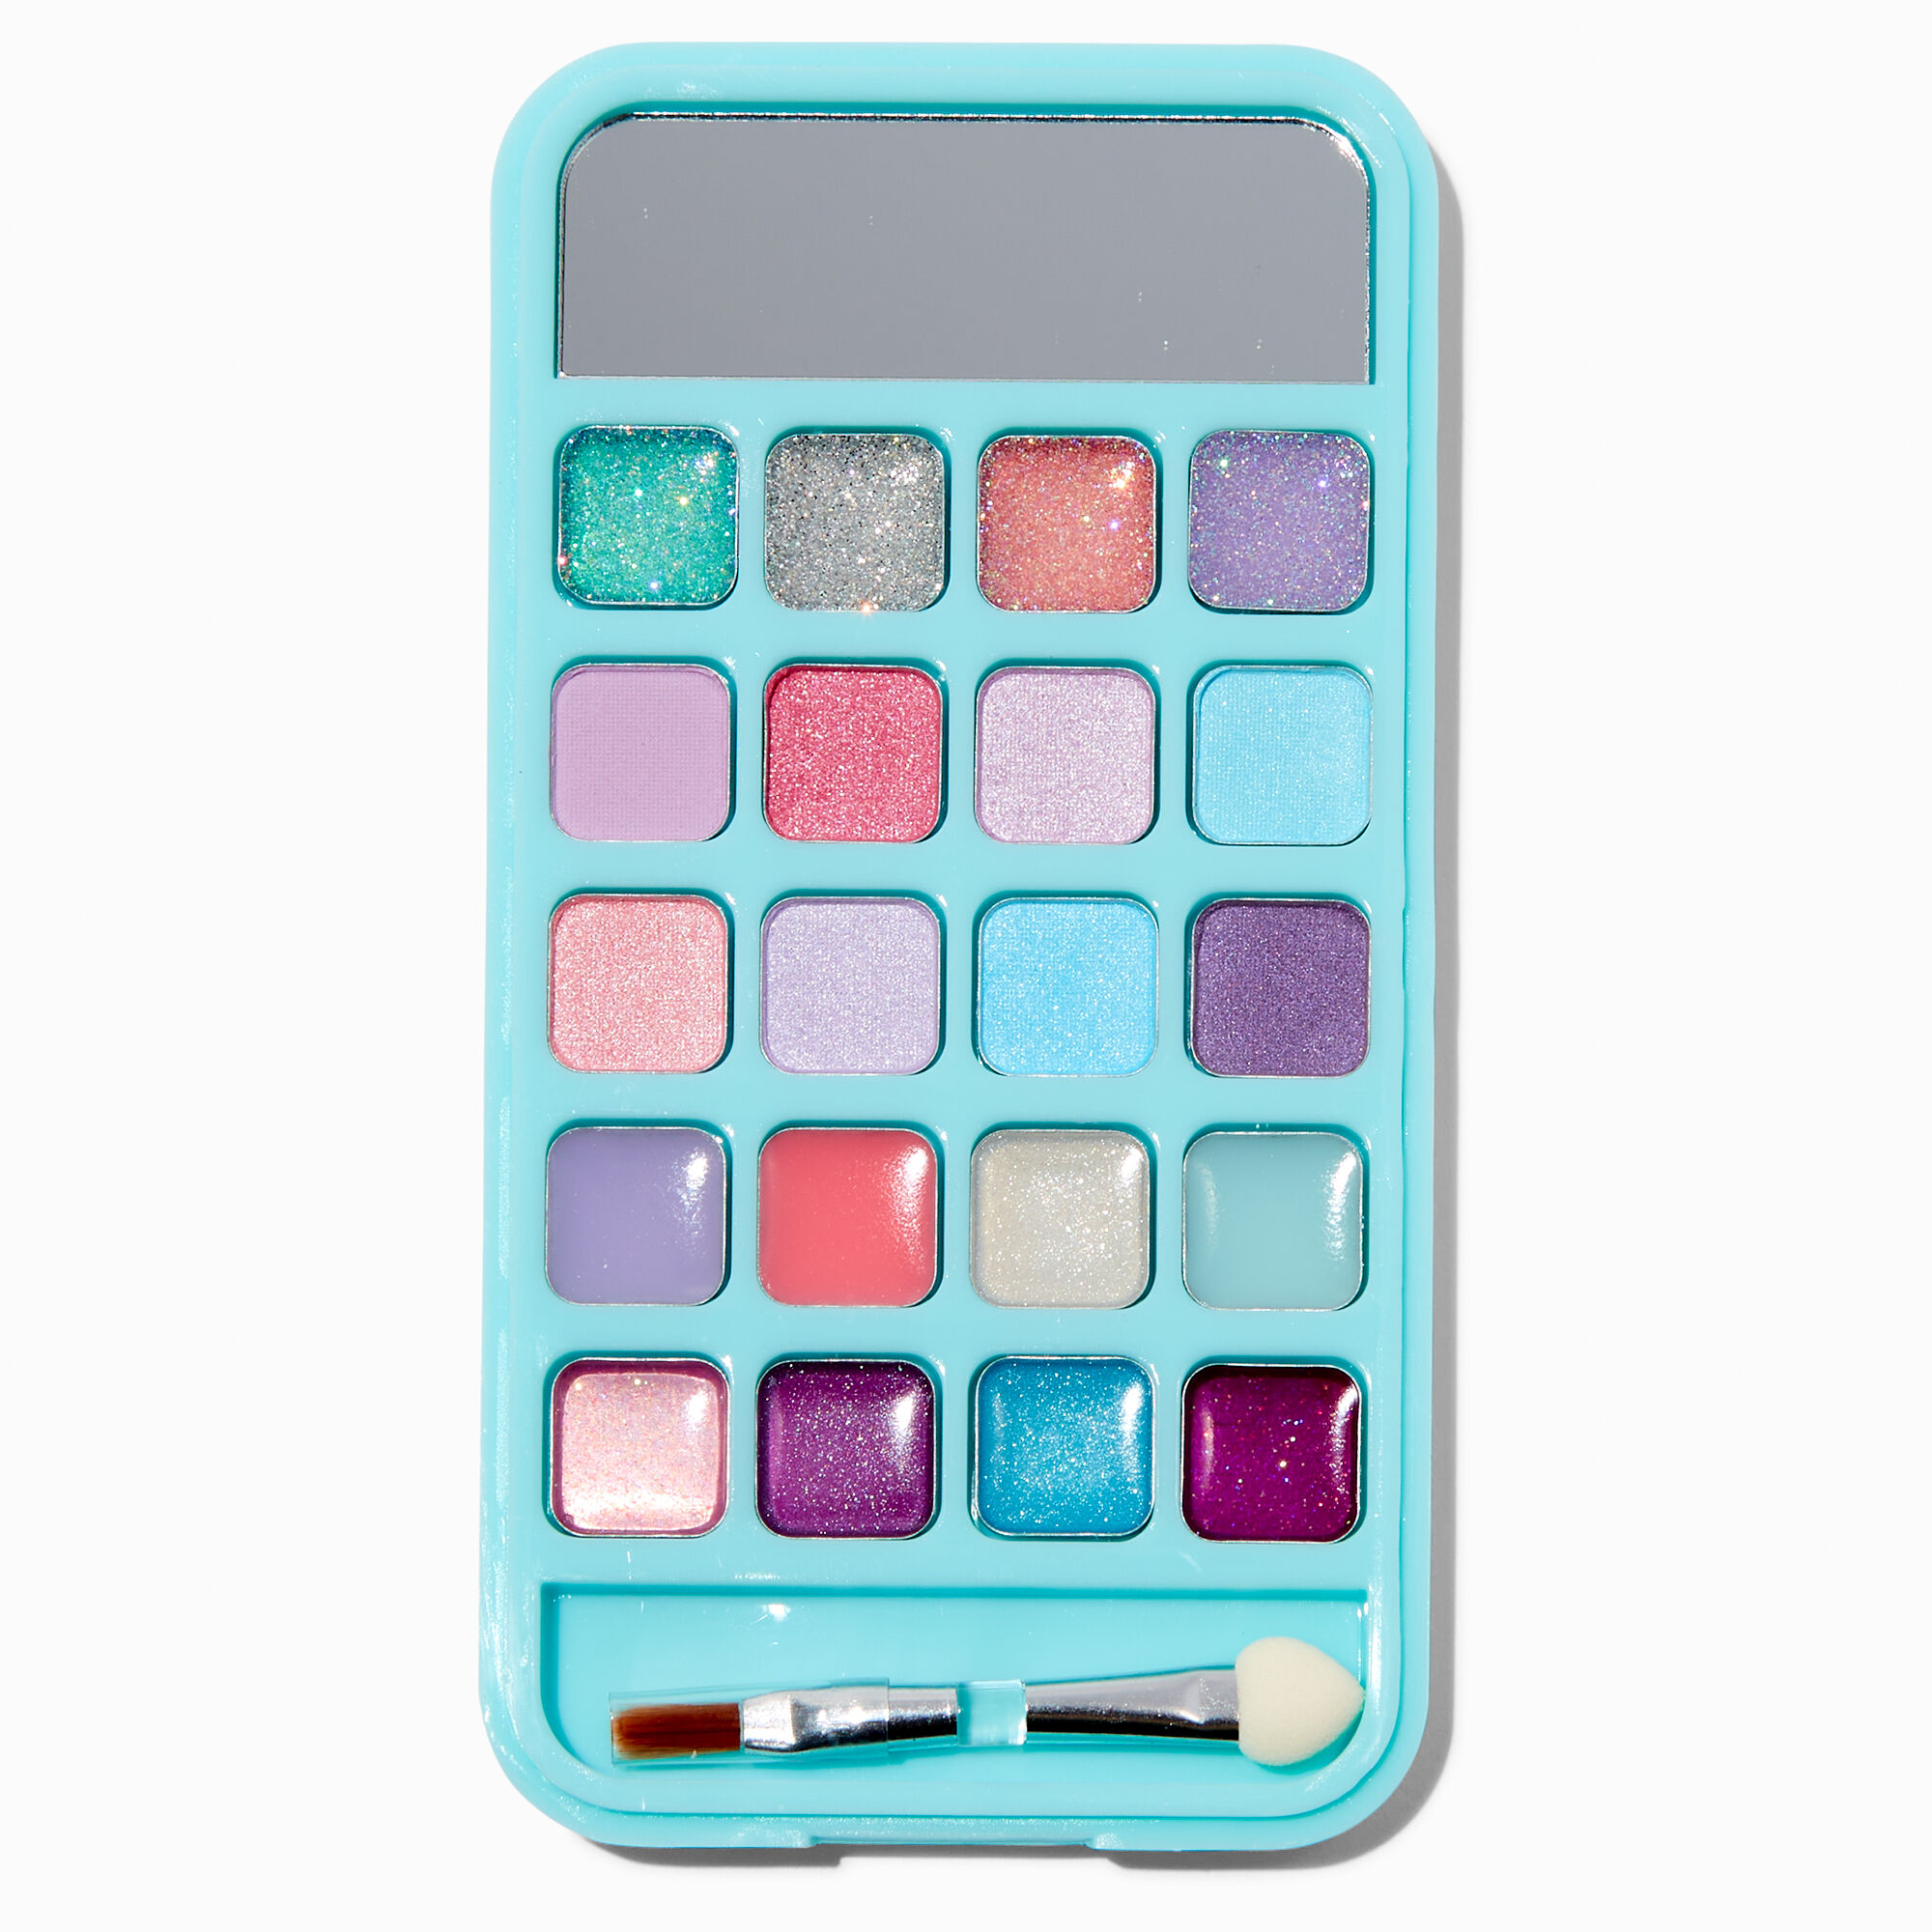 View Claires Squish em Critters Bling Cellphone Makeup Palette information